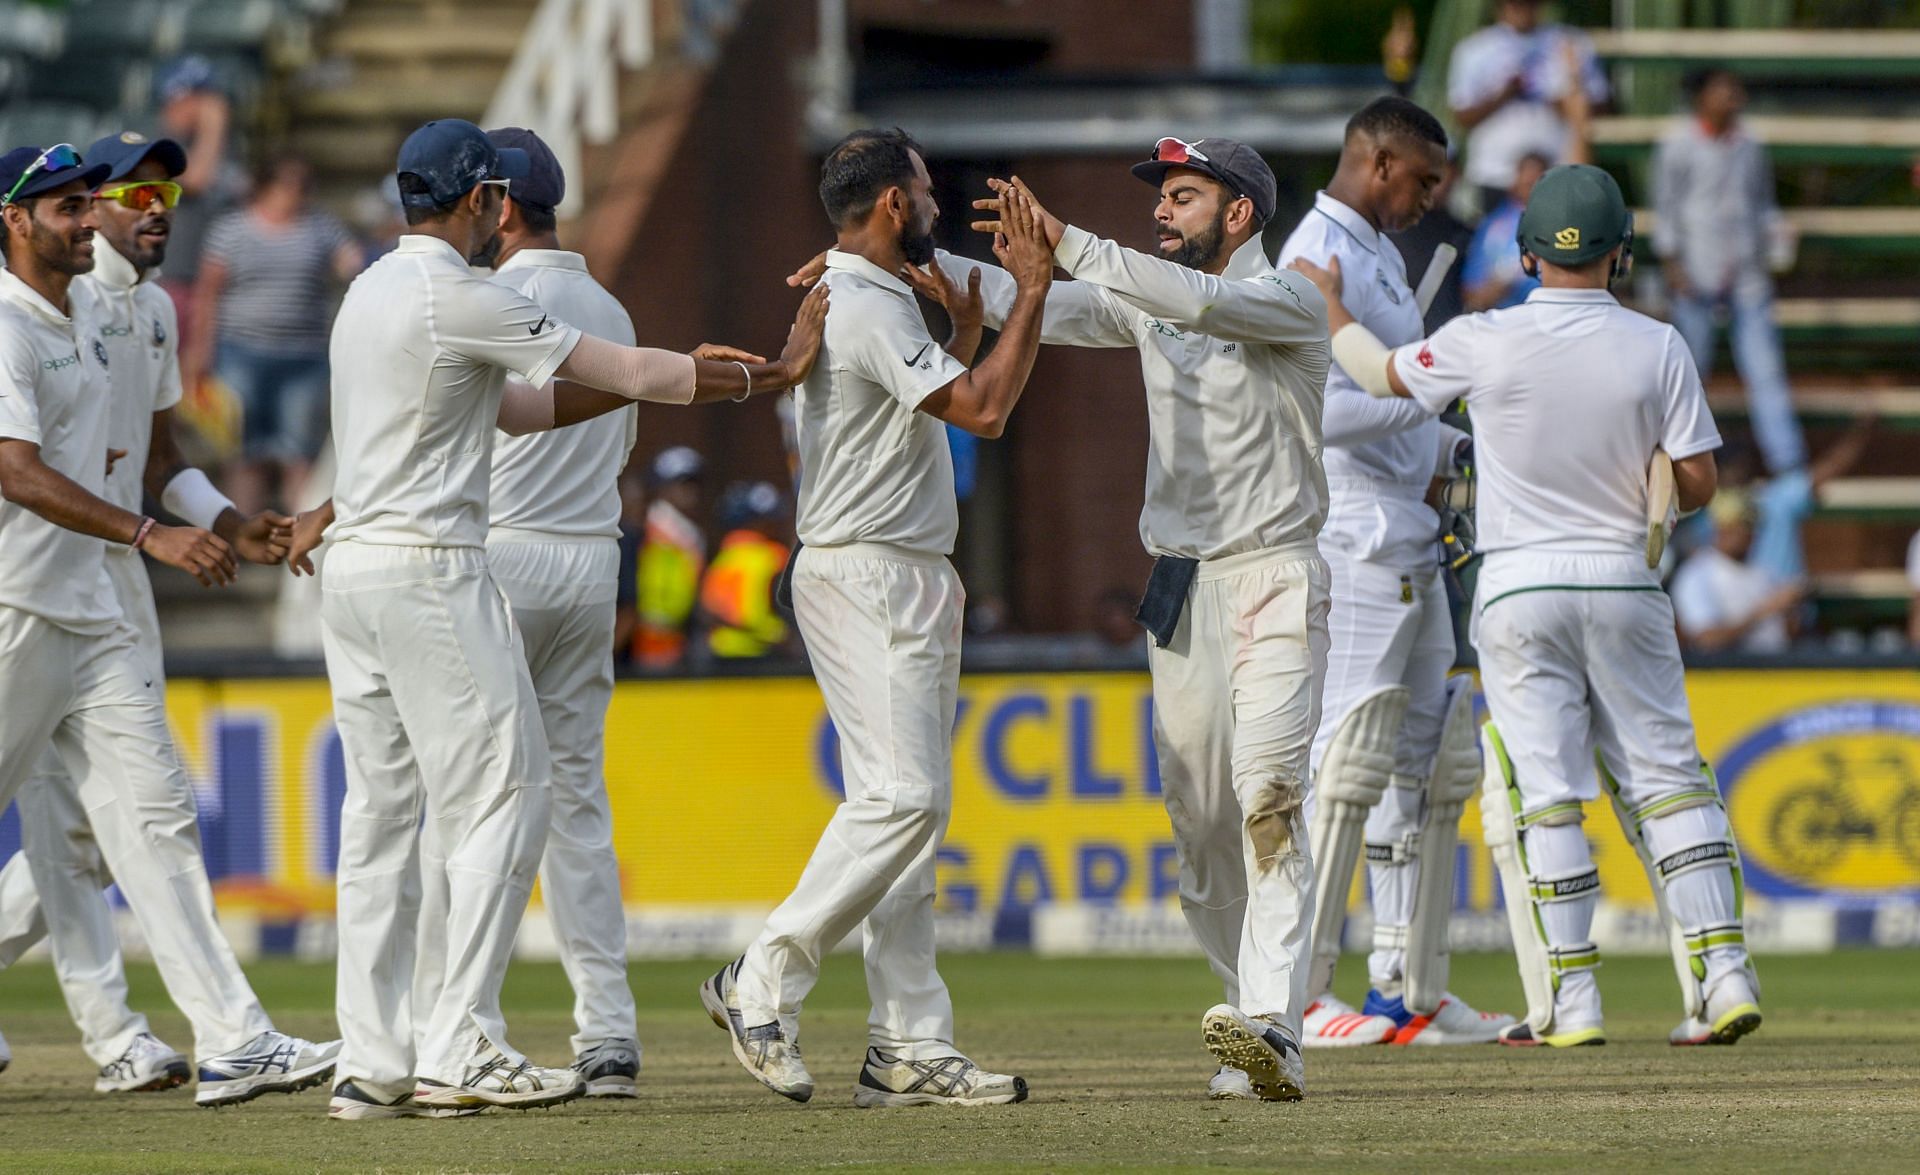 India are yet to win a Test series in South Africa, they lost 1-2 in 2018